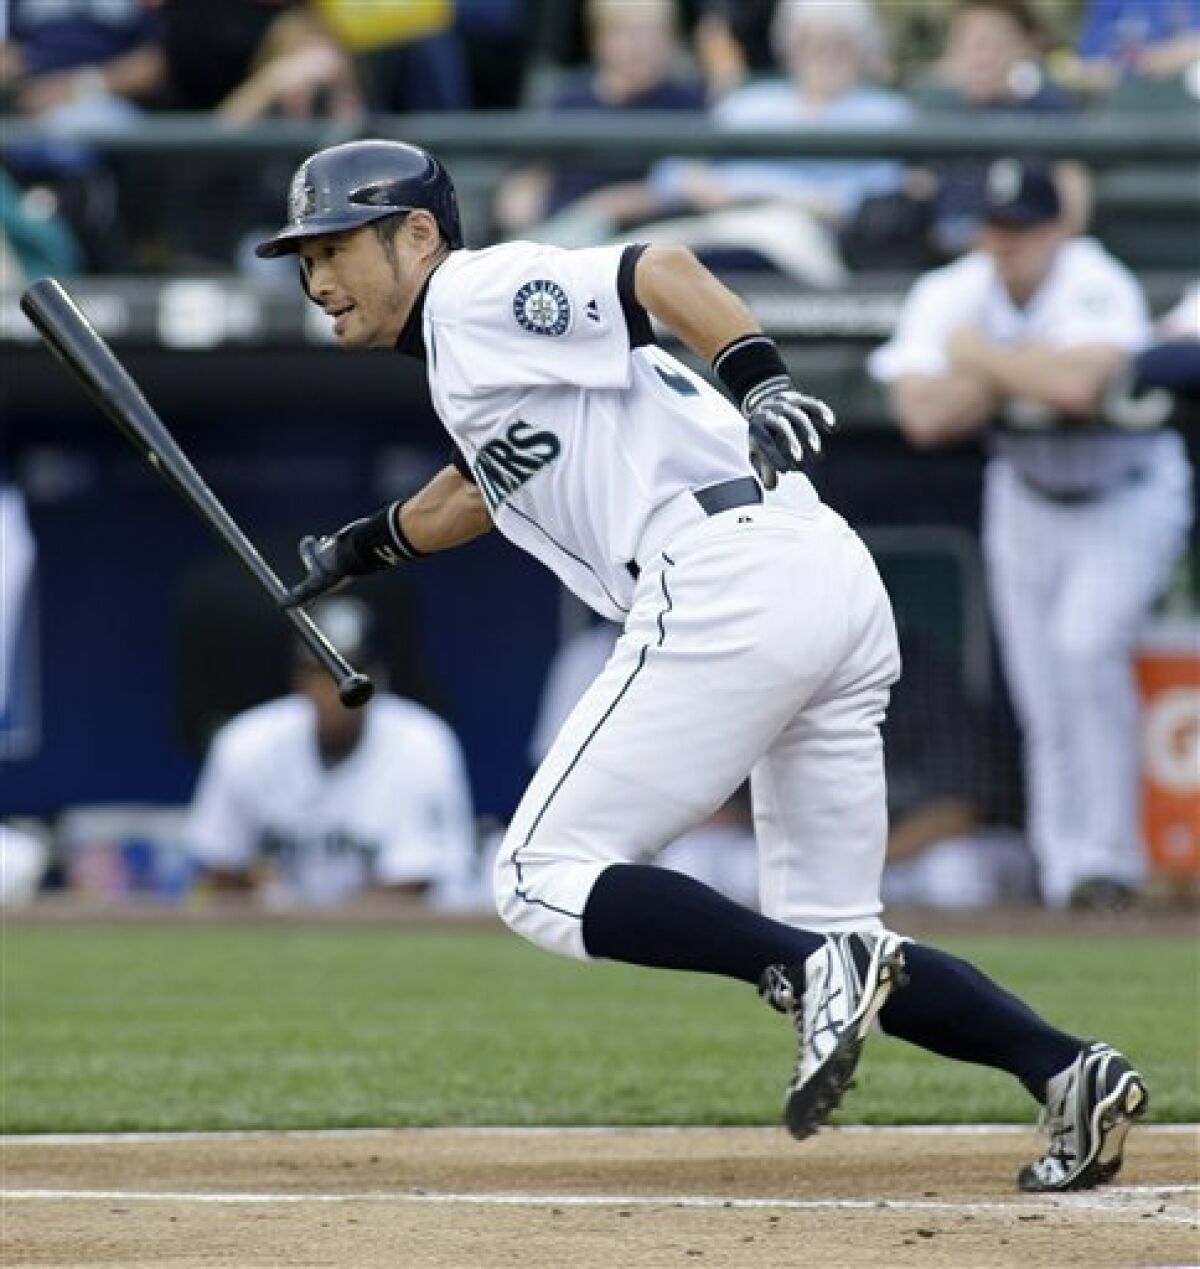 Seattle Mariners' Ichiro Suzuki heads for first base after hitting a single in the first inning of a baseball game against the Baltimore Orioles, Tuesday, June 2, 2009, at Safeco Field in Seattle. The hit set a Mariners franchise hitting streak record at .26. (AP Photo/Ted S. Warren)